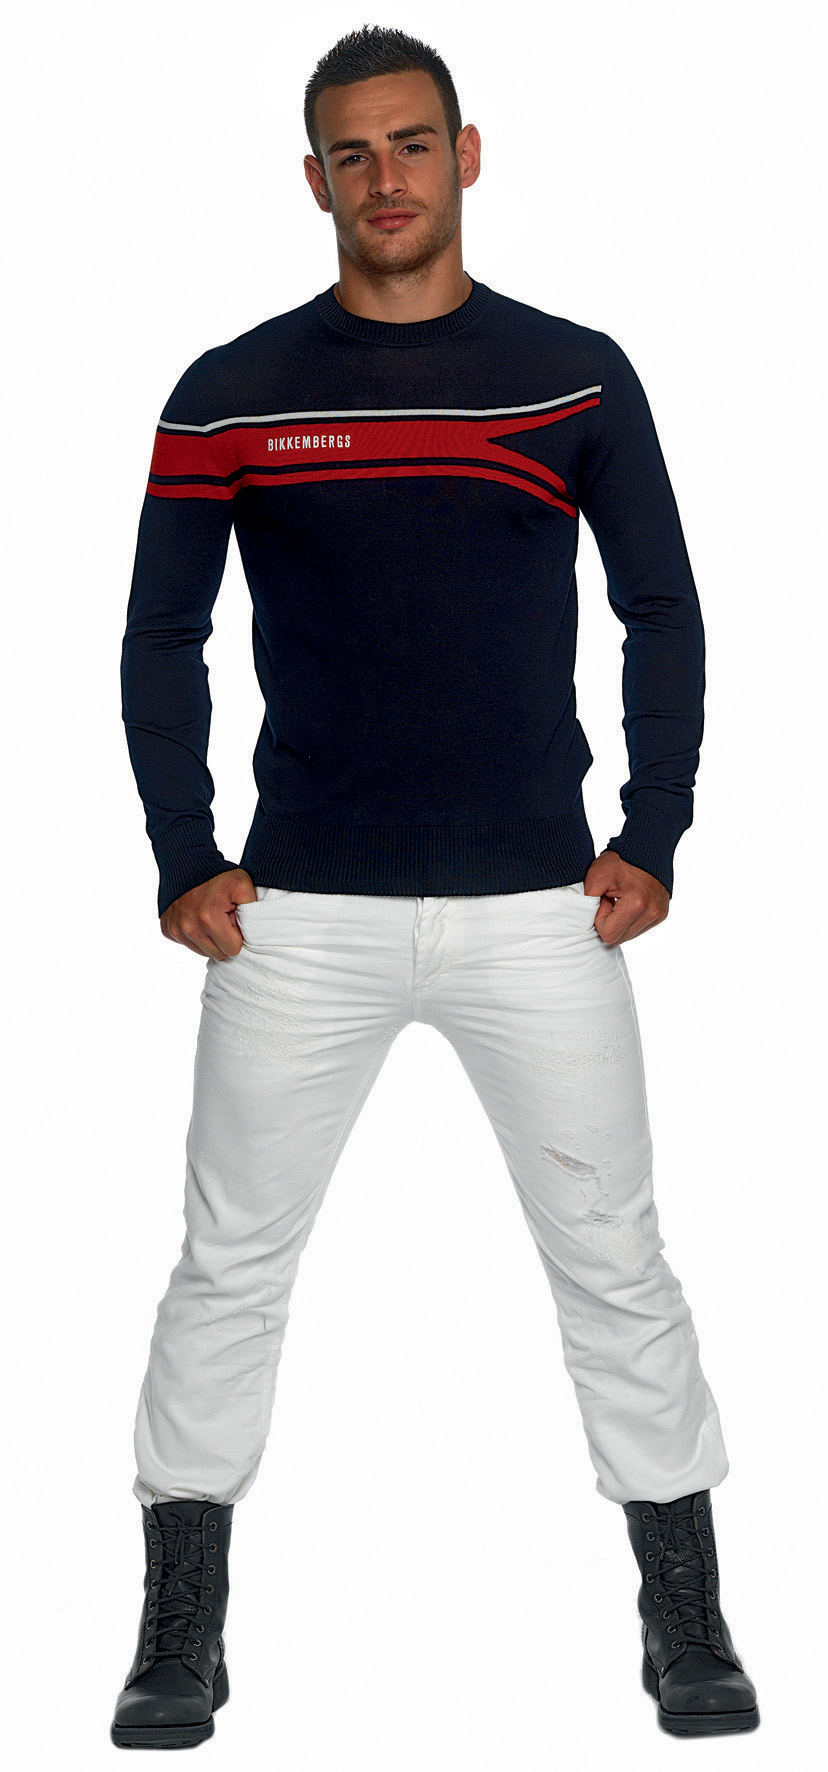 Bikkembergs Knitwear: Casual and Playful for Summer 2010